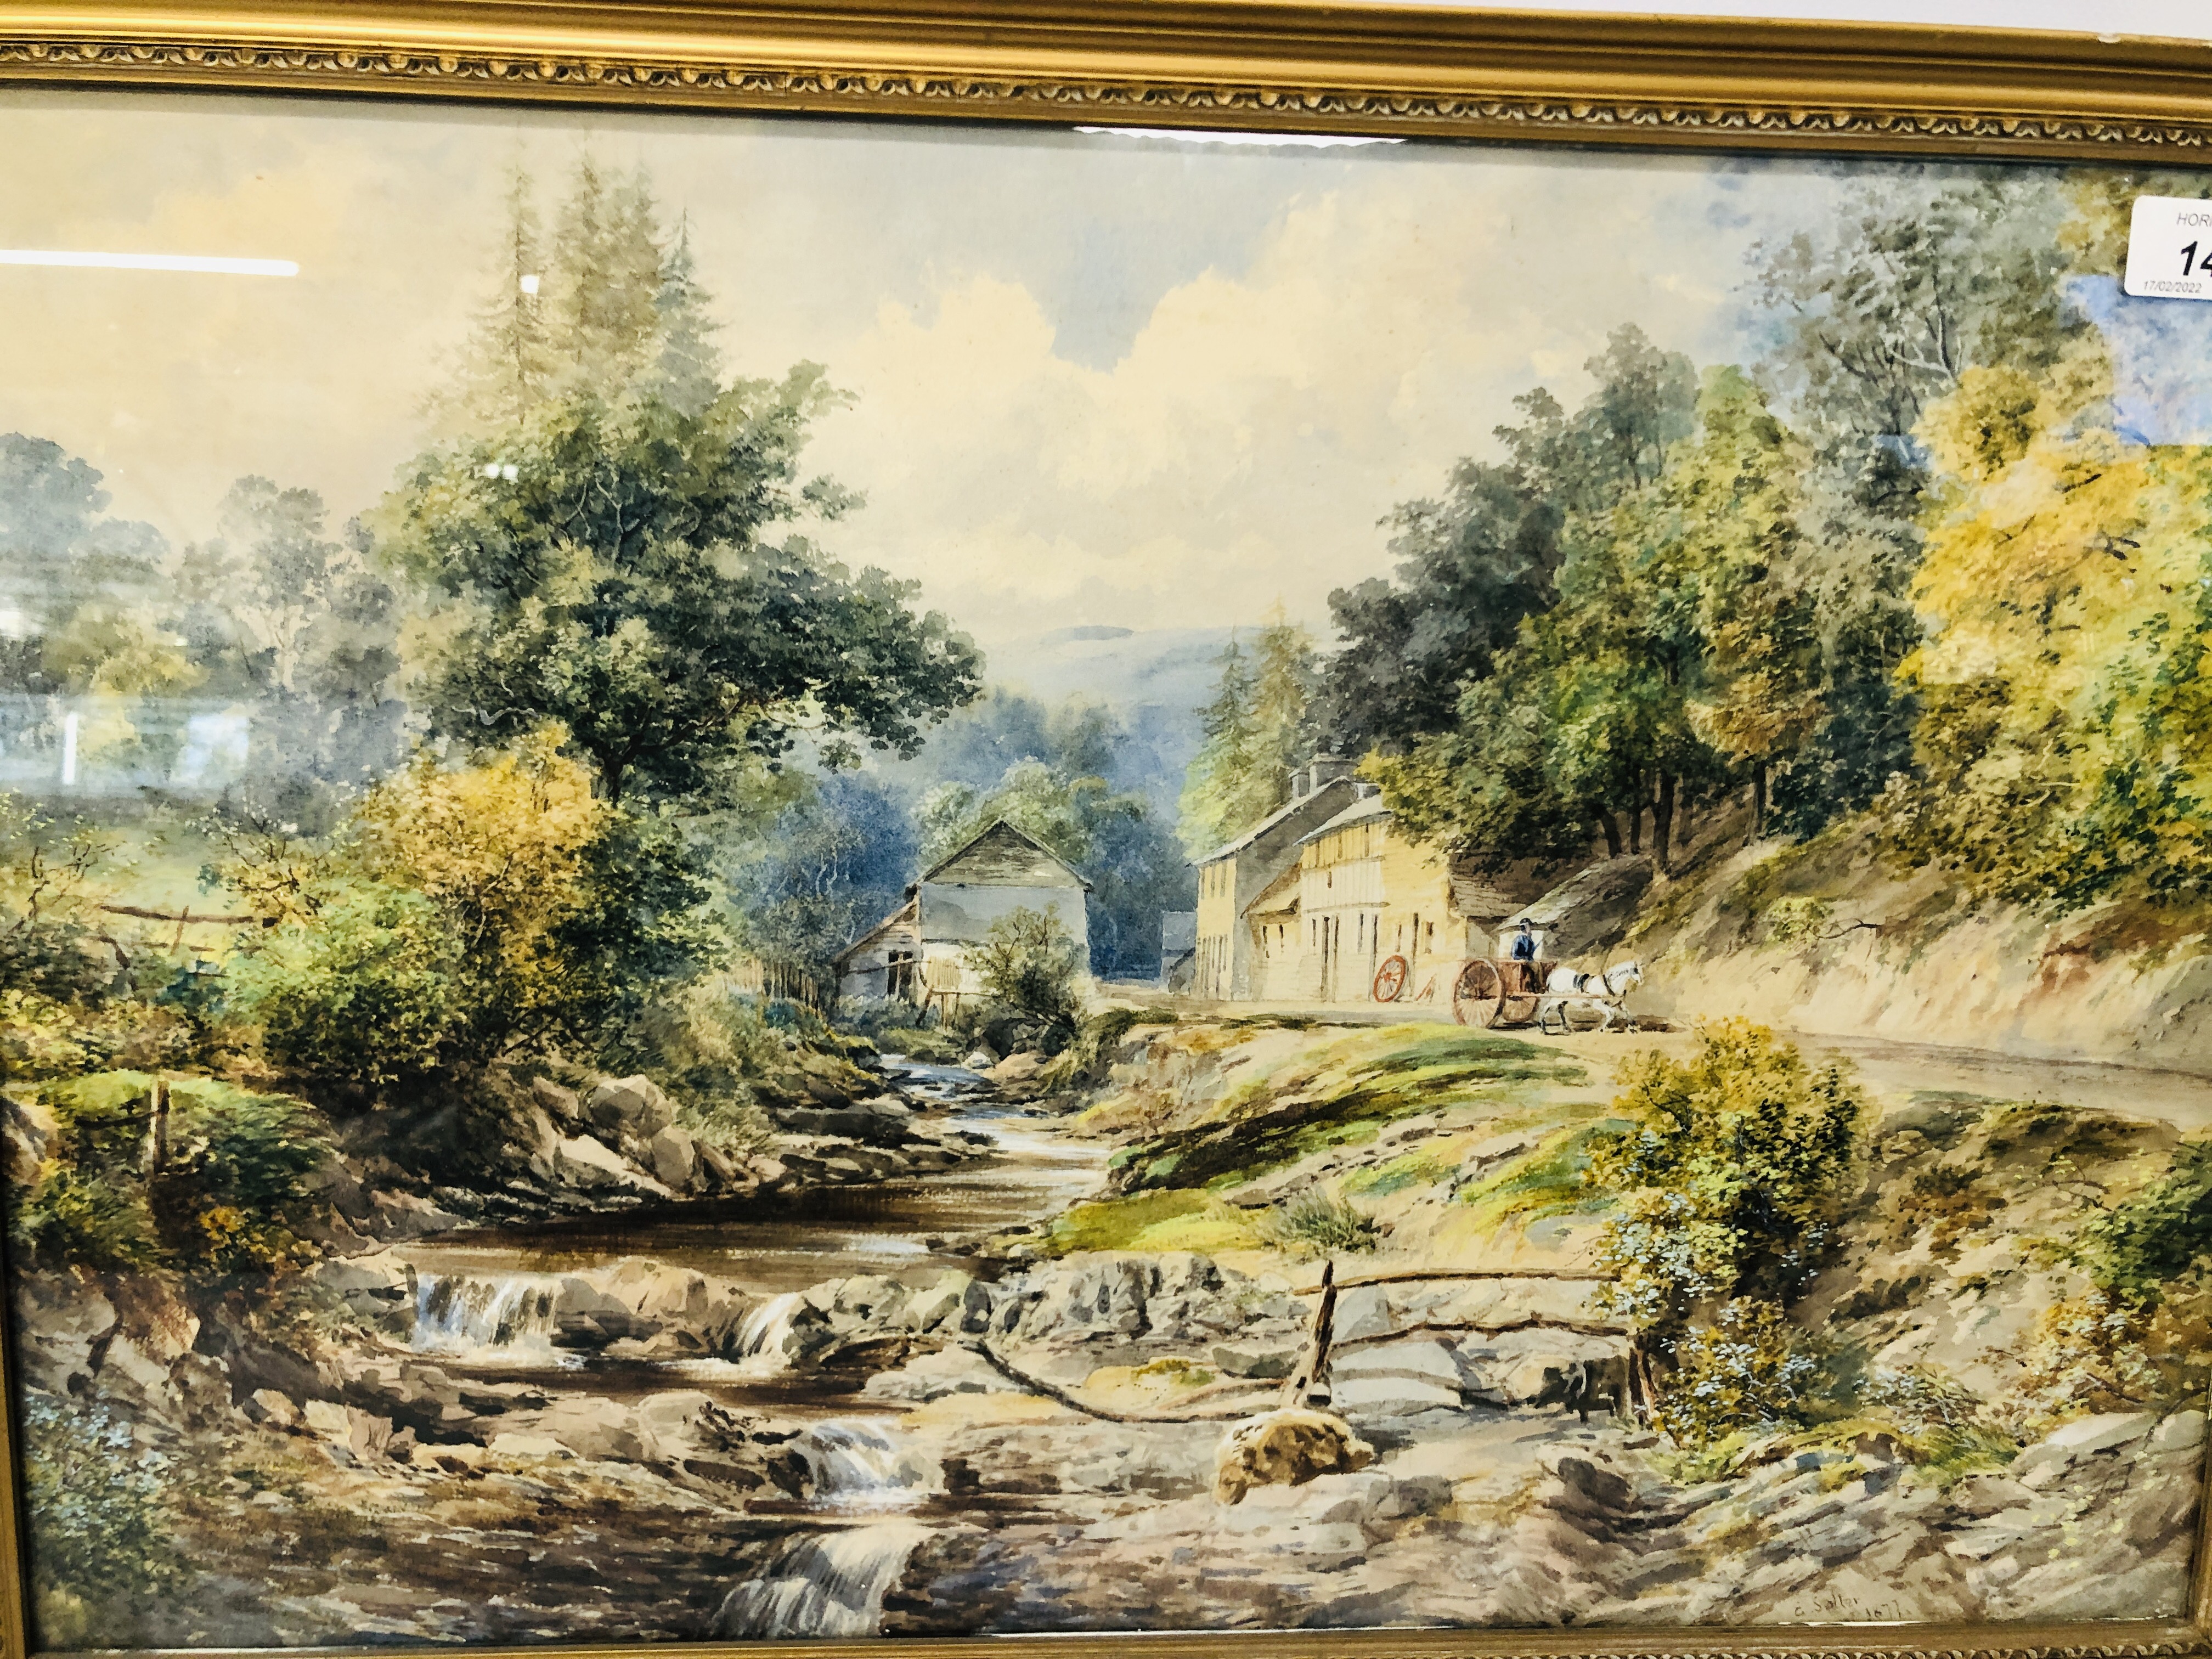 P. SALTER WATERCOLOUR OF PNY AND TRAP BY STREAM, SIGNED AND DATED 1877, 35 X 51CM. - Image 2 of 3